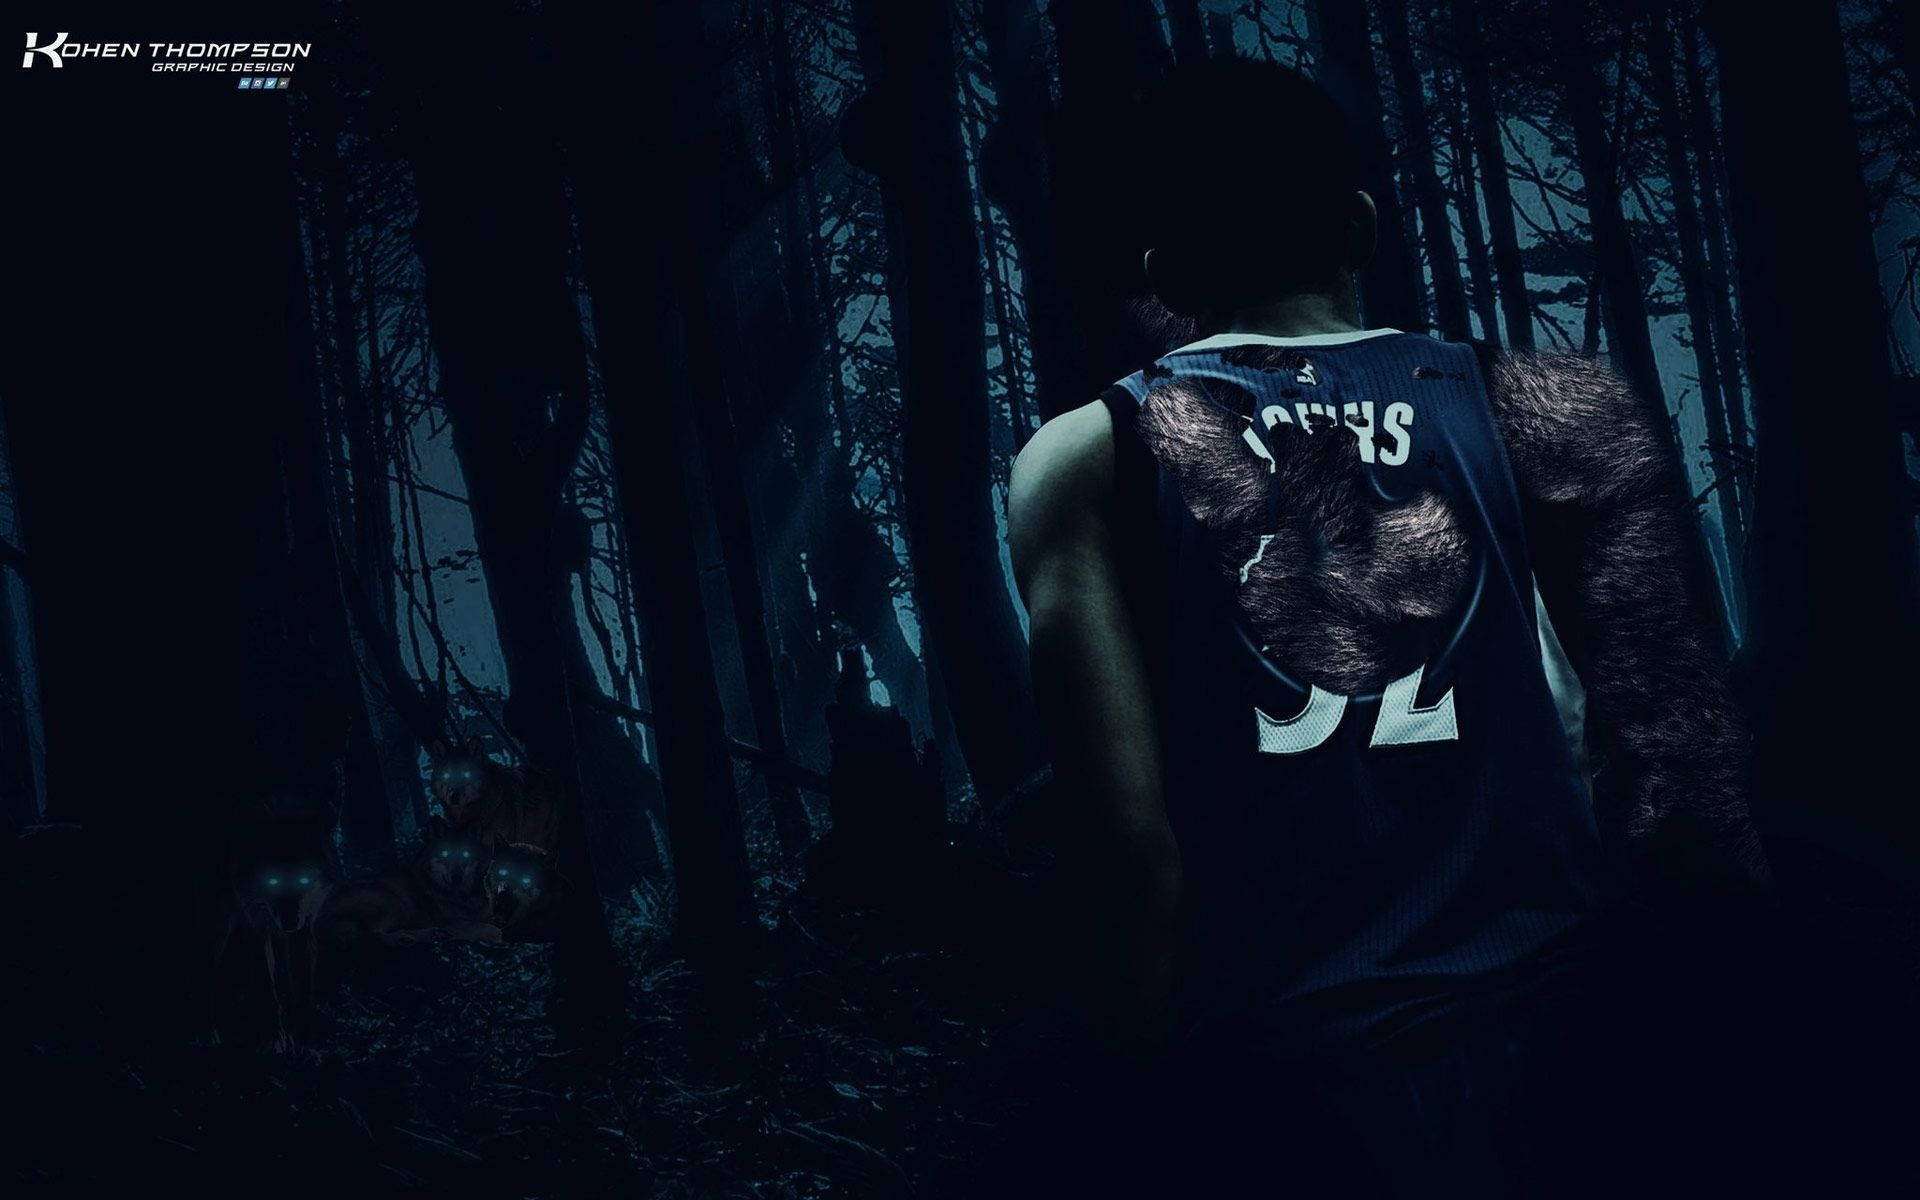 Karl-anthony Towns Ripped Wolves Jersey Background